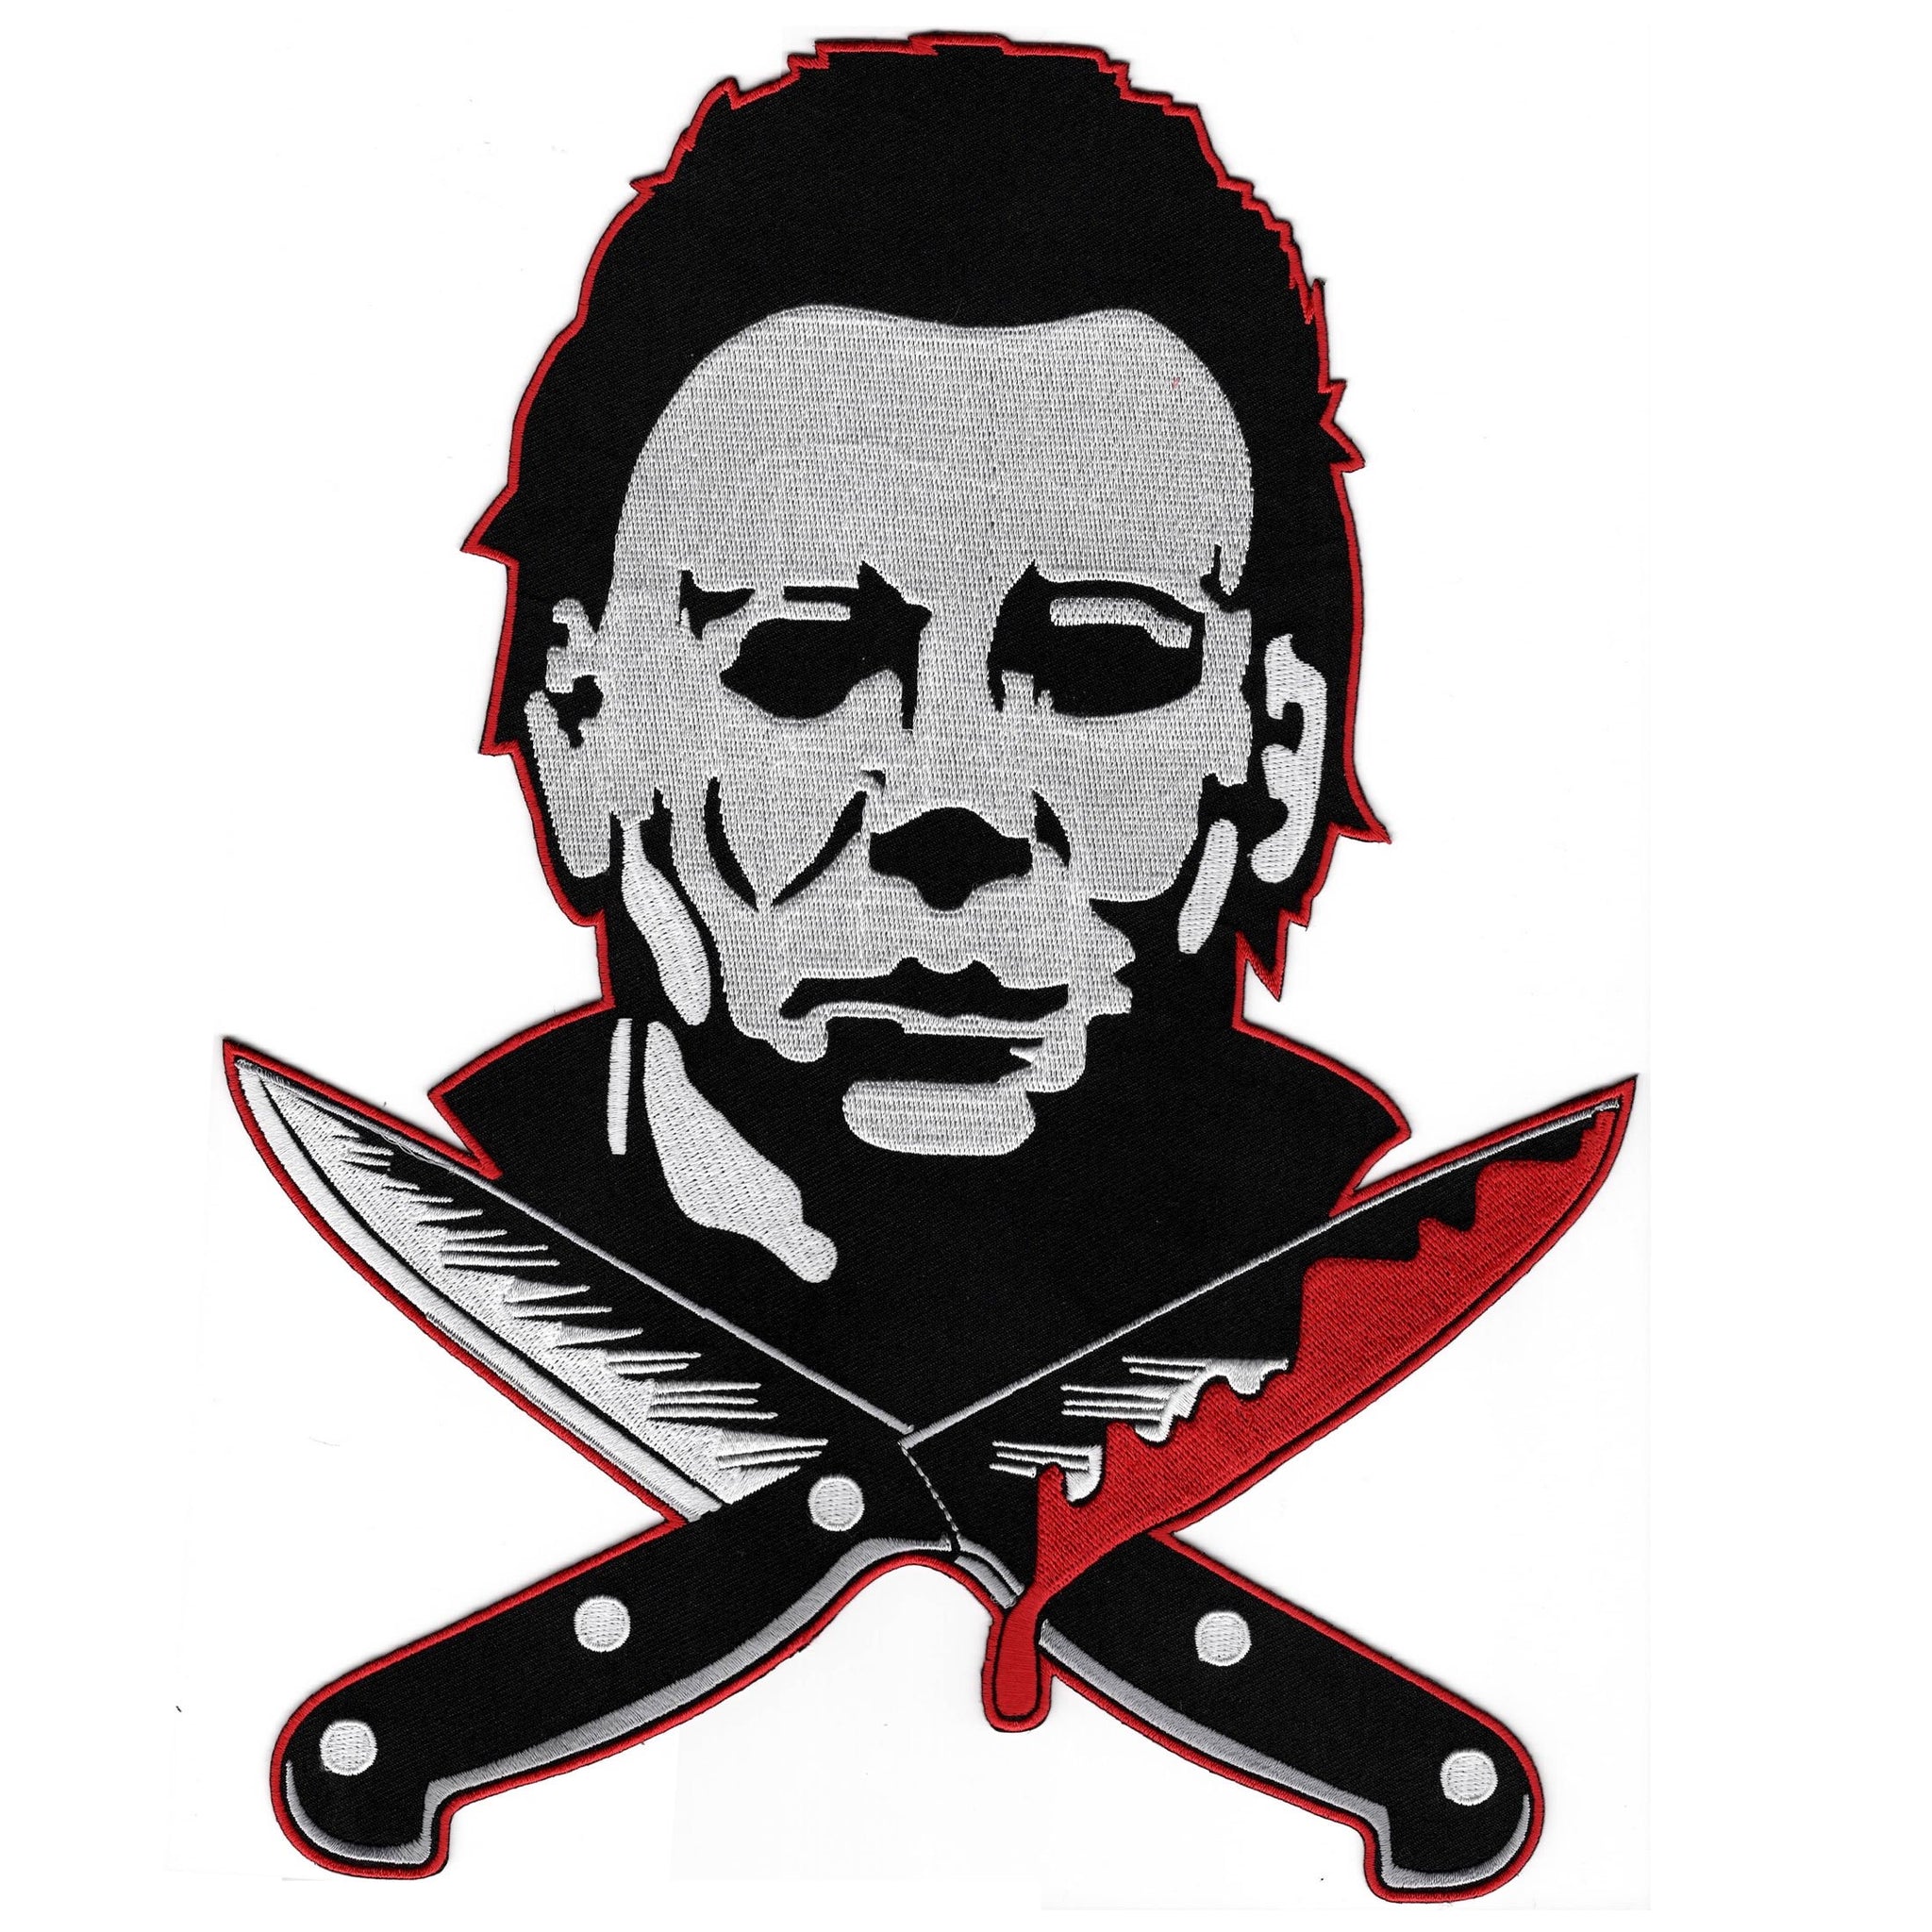 Halloween 2 Michael Myers Knives Patch